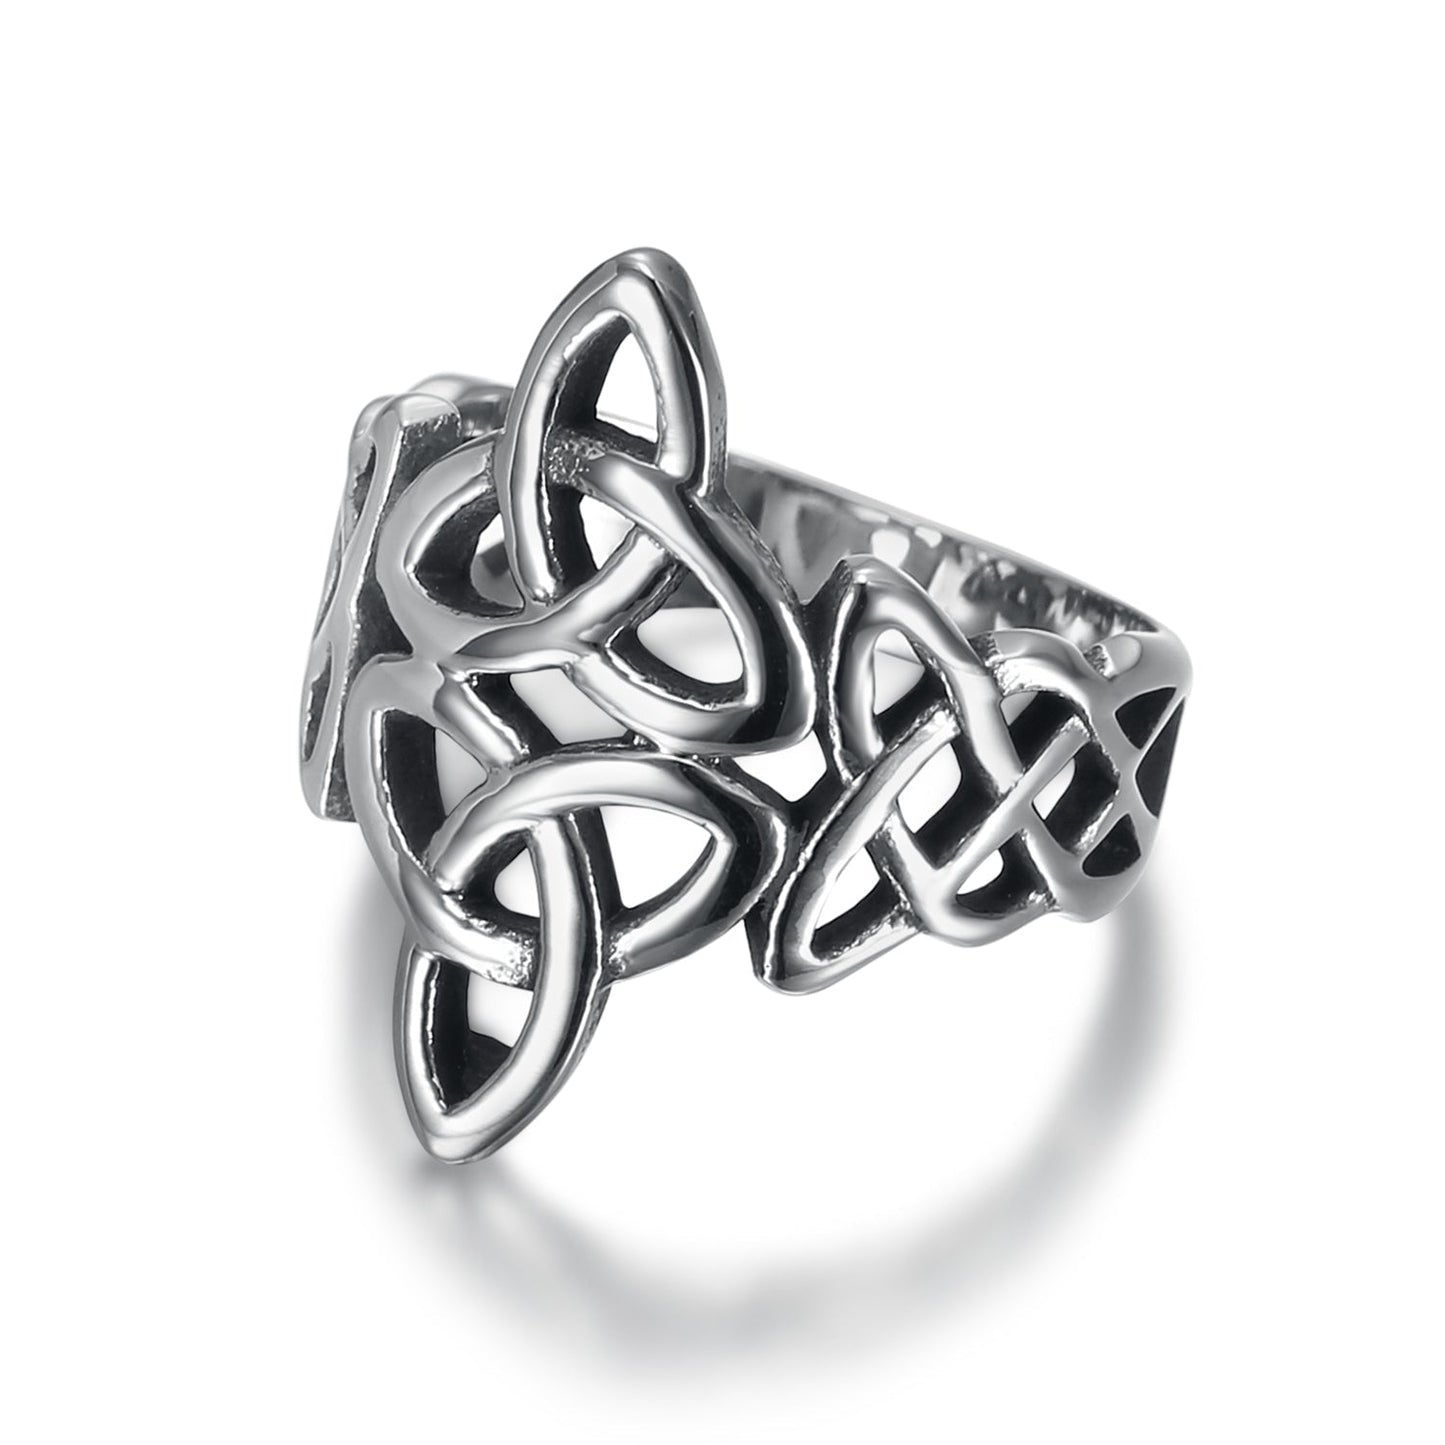 Nordic Pride Handcrafted Stainless Steel Triquetra and Celtic Knot Ring